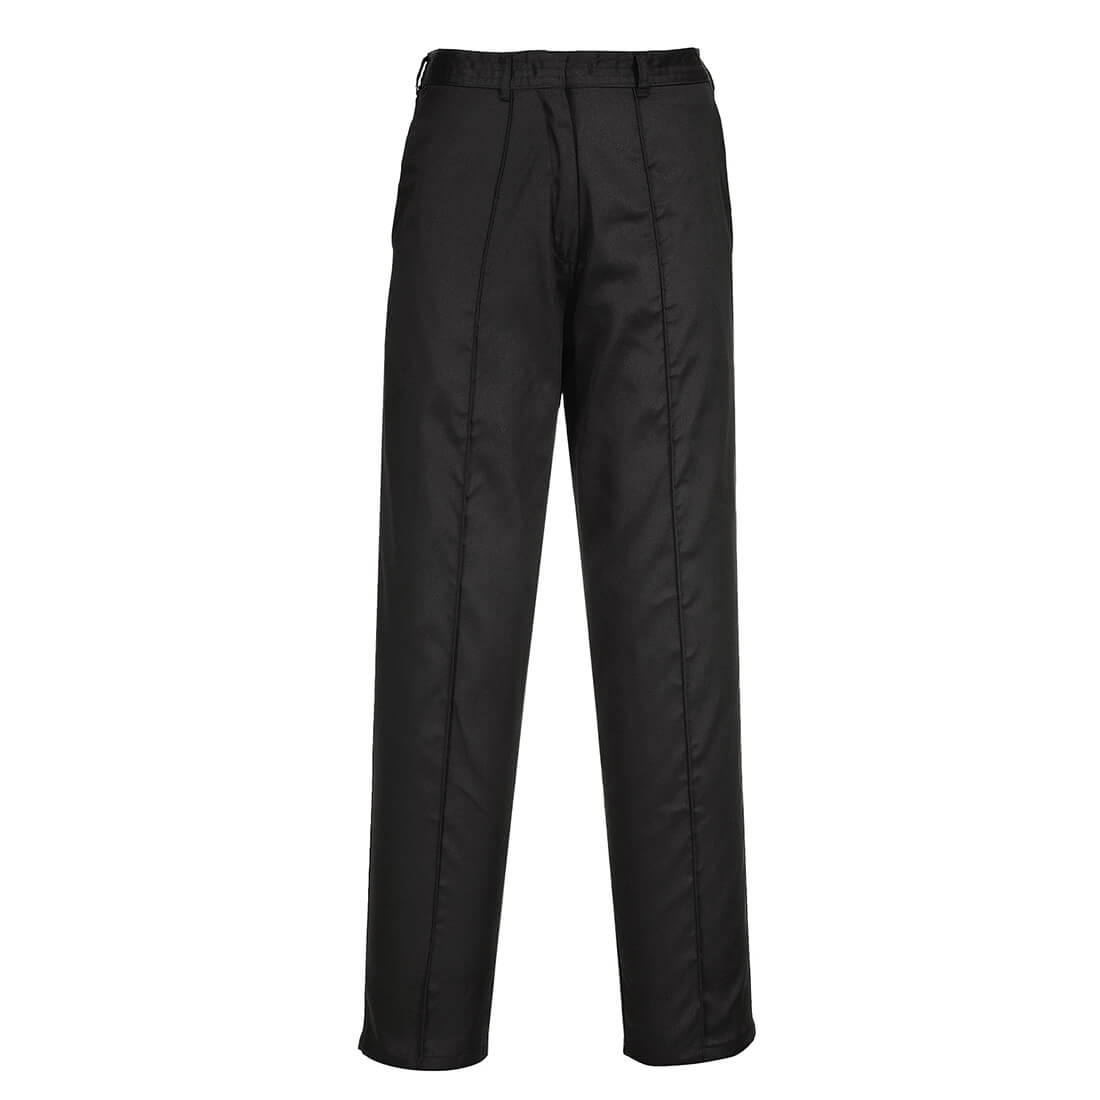 Image of Portwest LW97 ladies Elasticated Trousers Black 3XL 31"